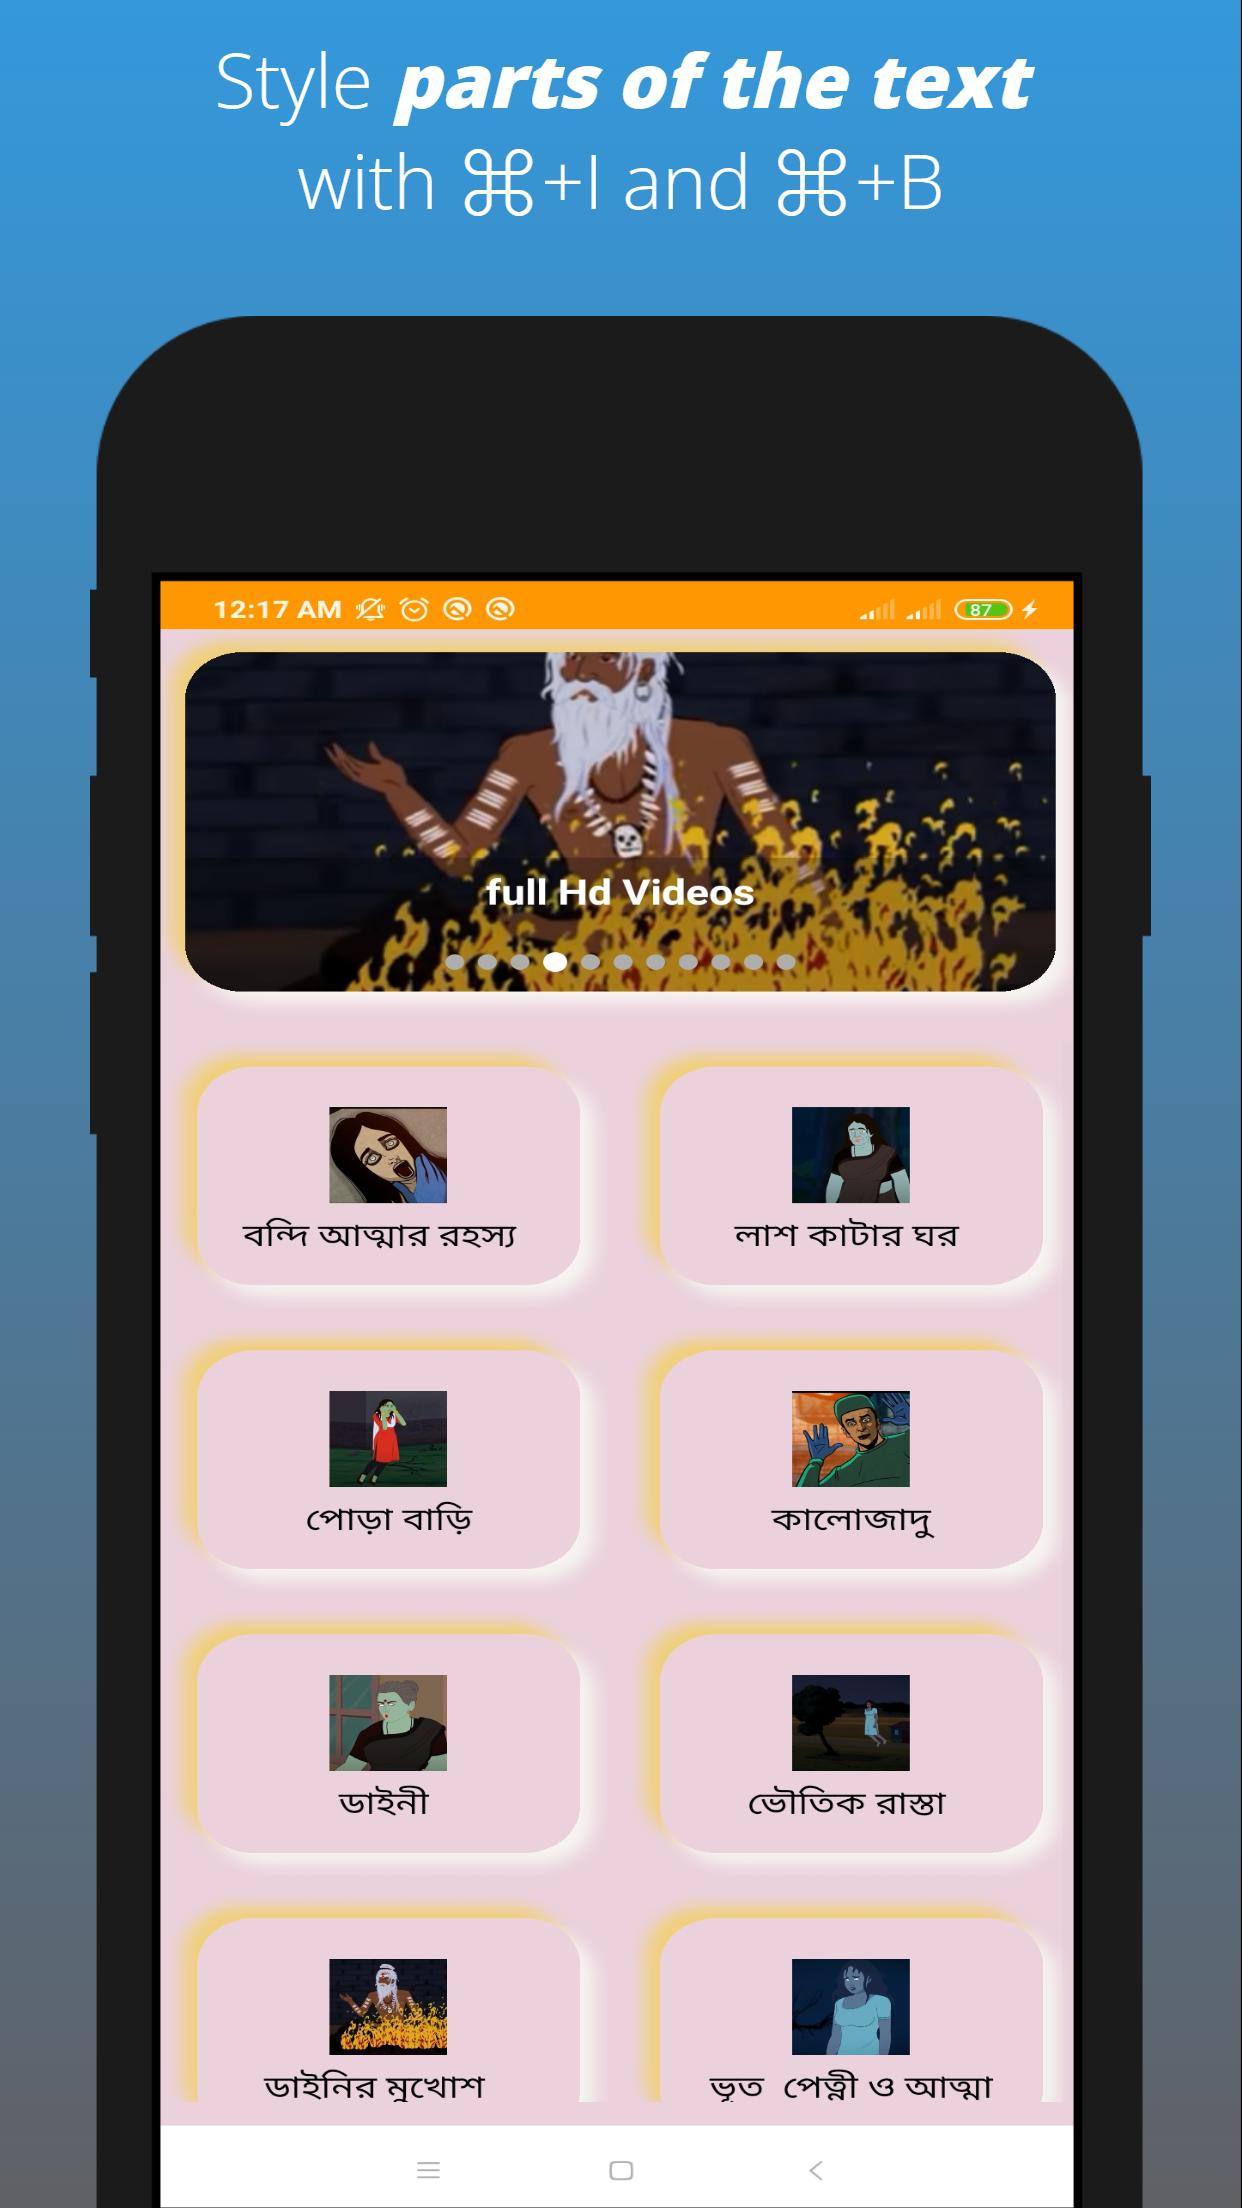 Bangla Bhuter Cartoon APK for Android Download